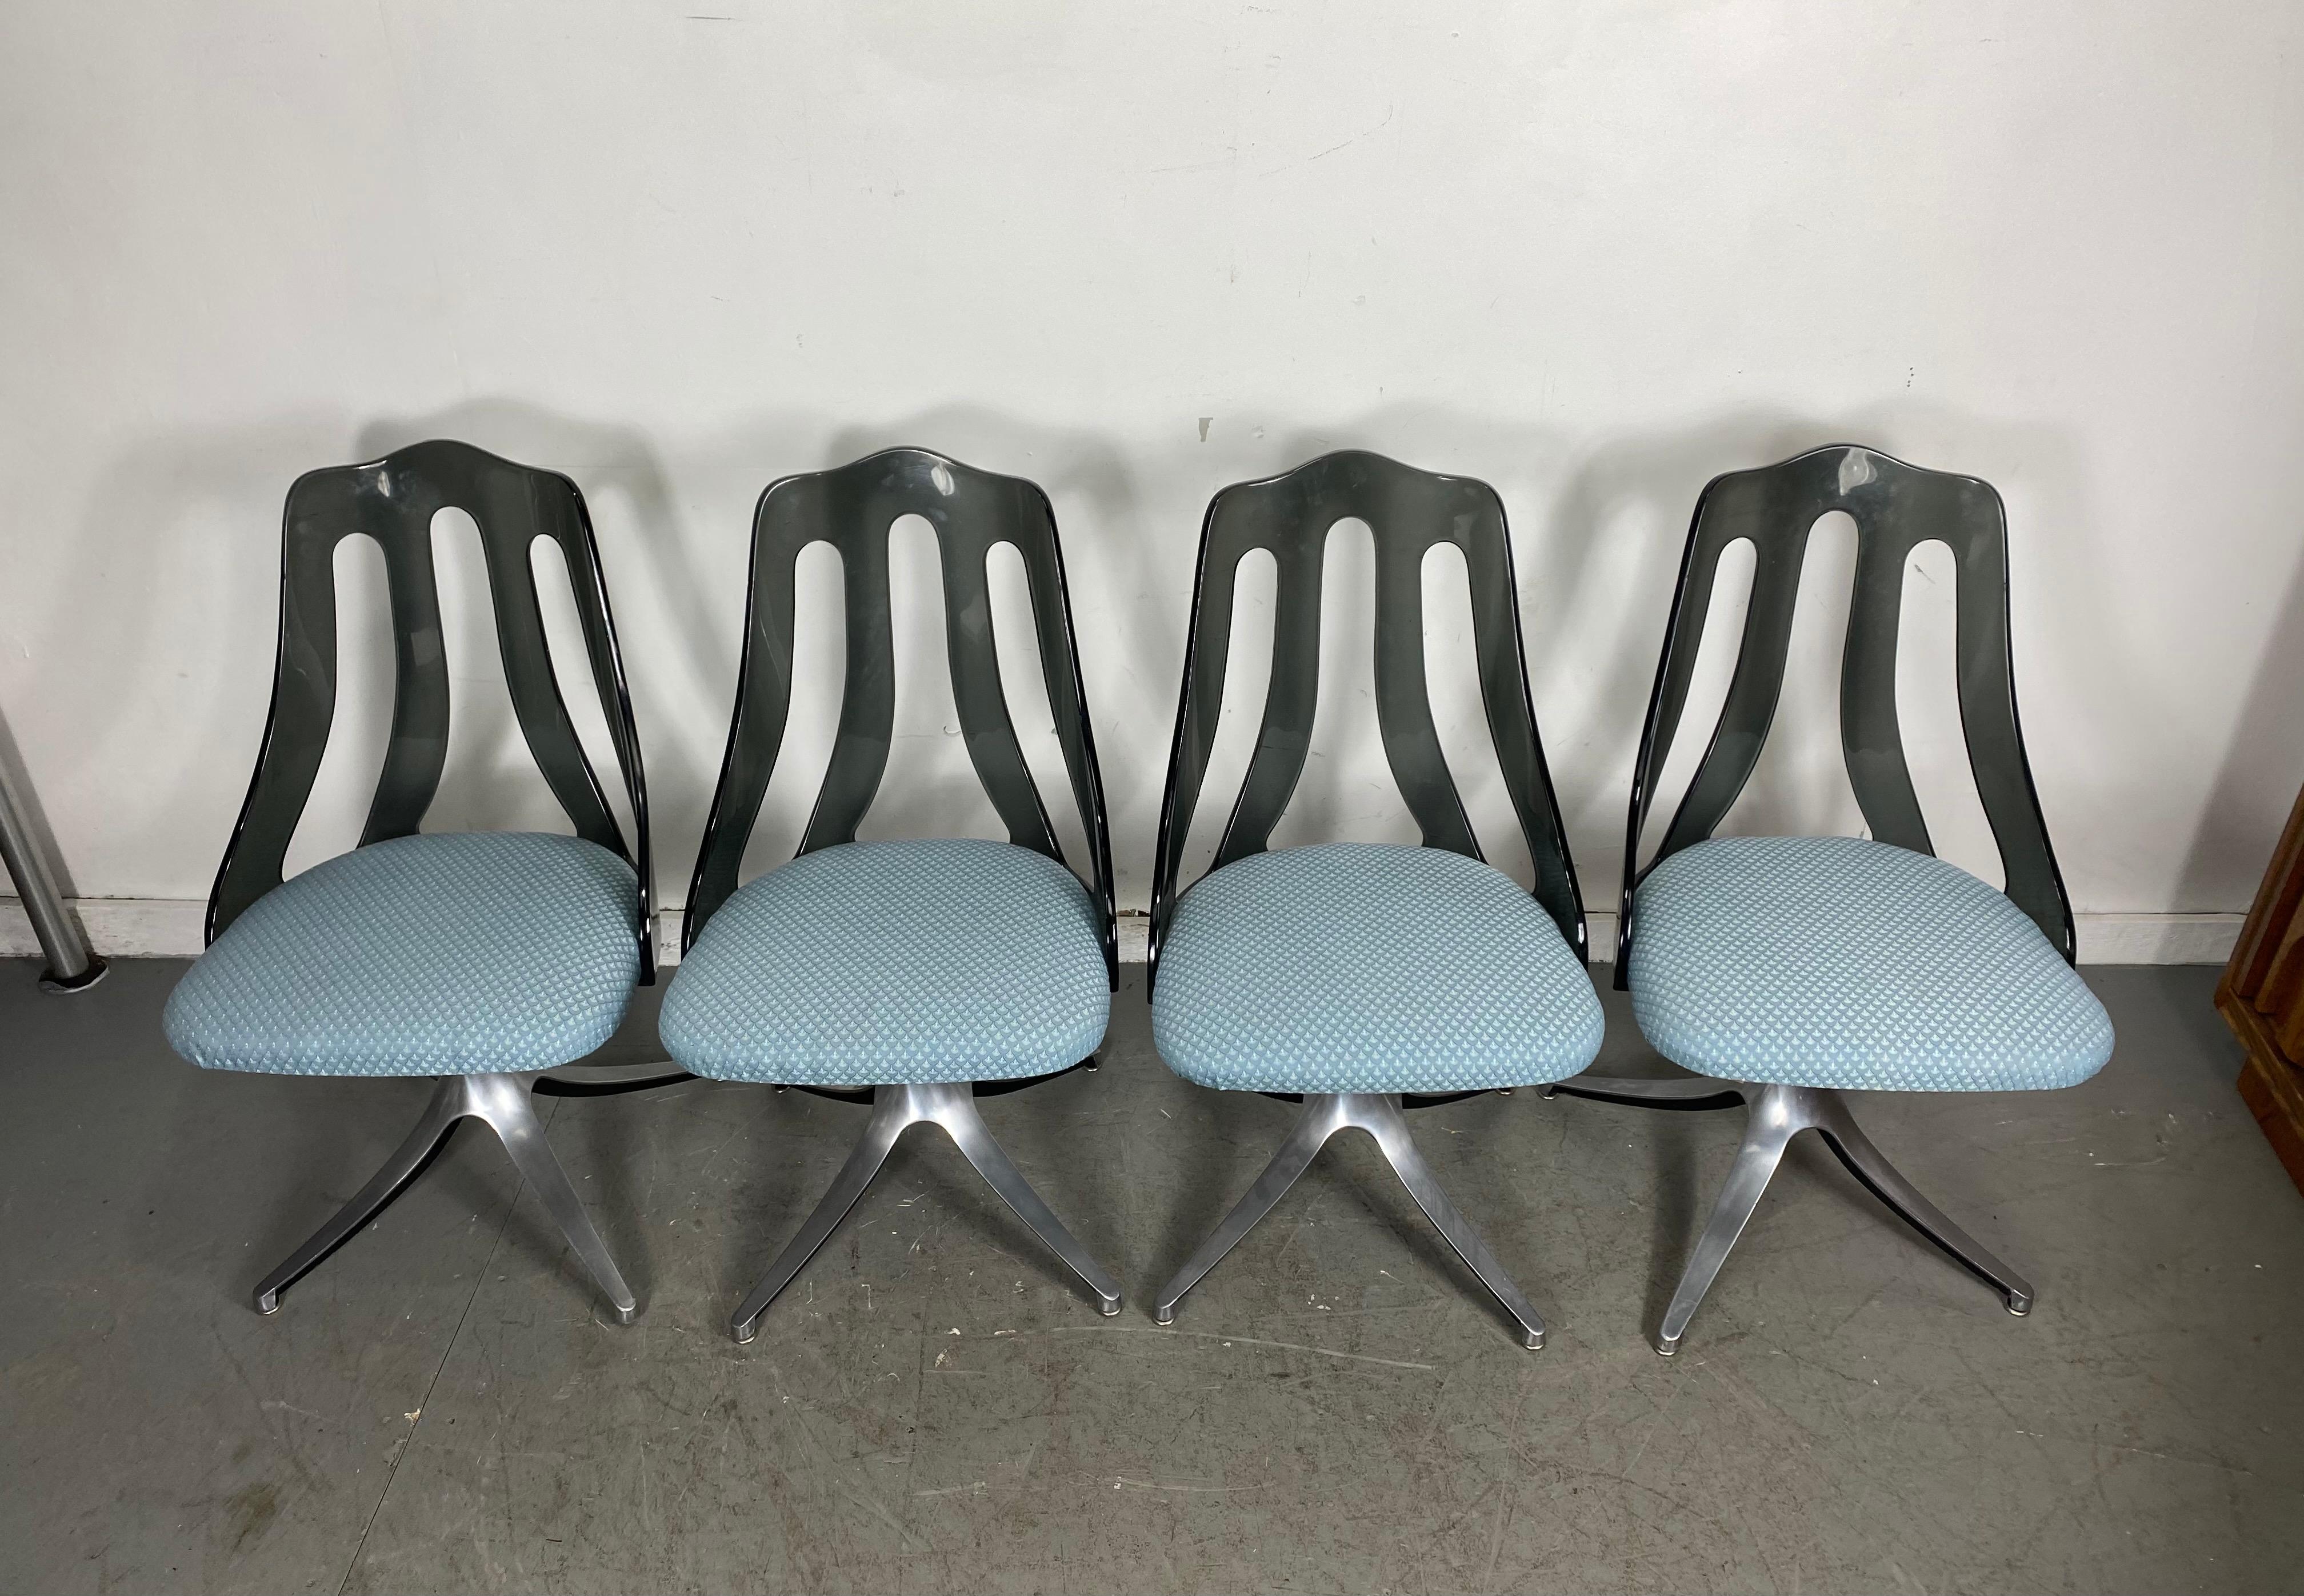 Modern Space Age Smoke Lucite and Chrome Dining Chairs by Howell / Interlake 1